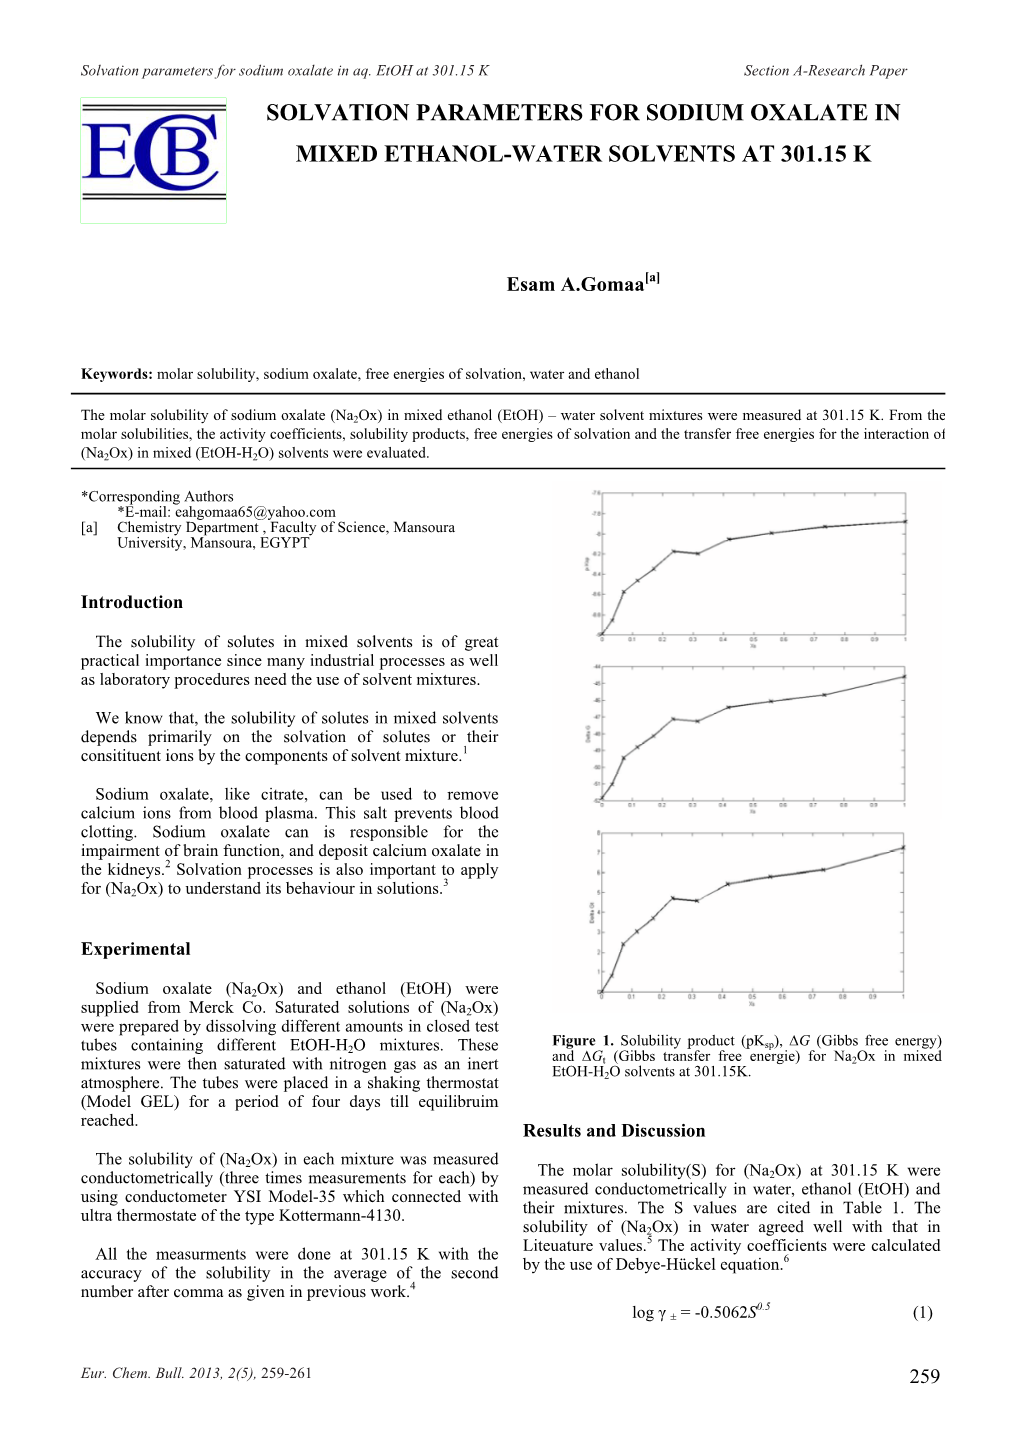 Solvation Parameters for Sodium Oxalate in Mixed Ethanol-Water Solvents at 301.15 K